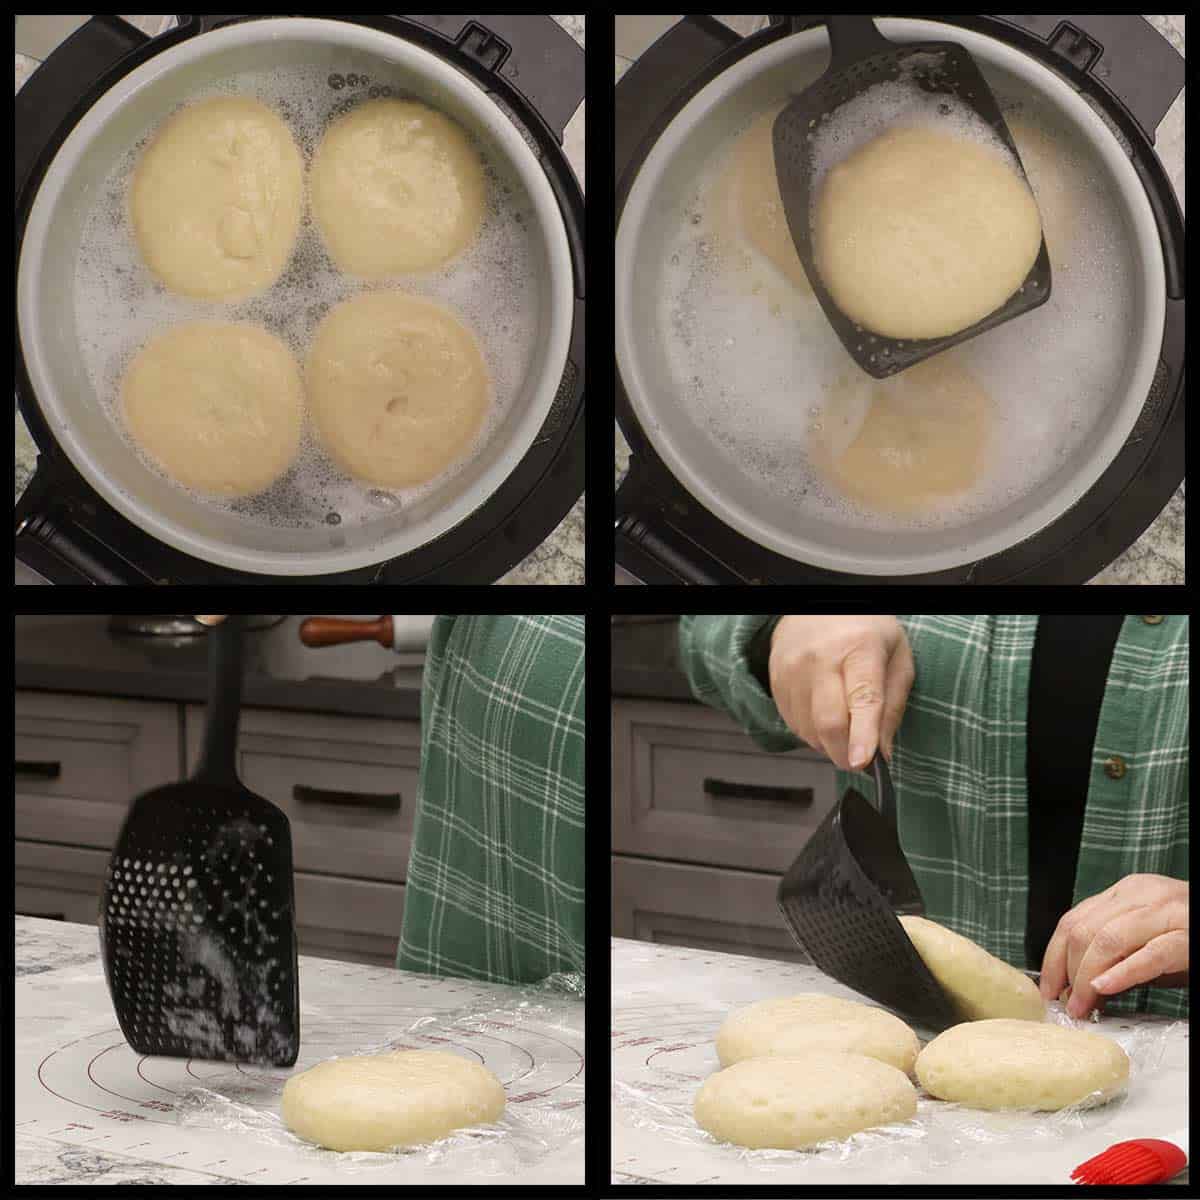 Flipping and then removing the buns from the baking soda bath.